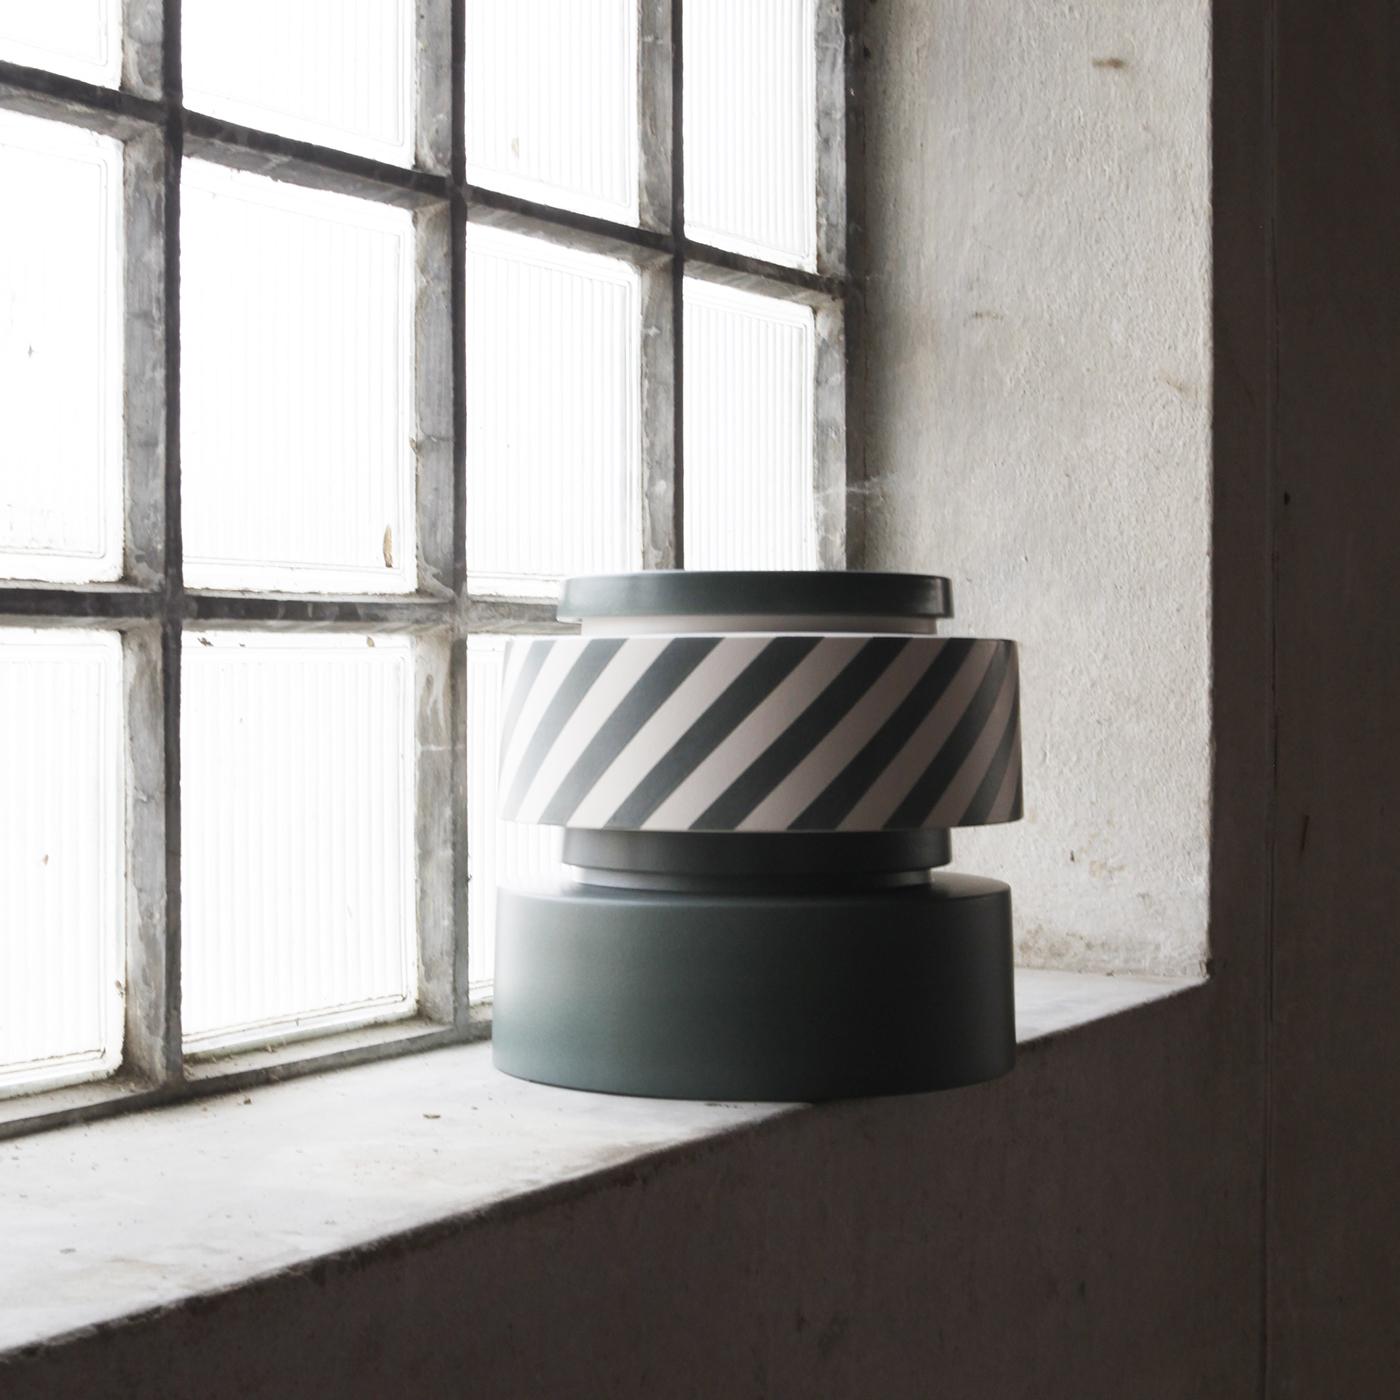 A delightfully stylish ceramic vase where you can keep any precious item, this charming ceramic piece is crafted entirely by hand and comes in matt white with diagonal green stripes. Complete with a ceramic and wood lid, the Silos stackable is a